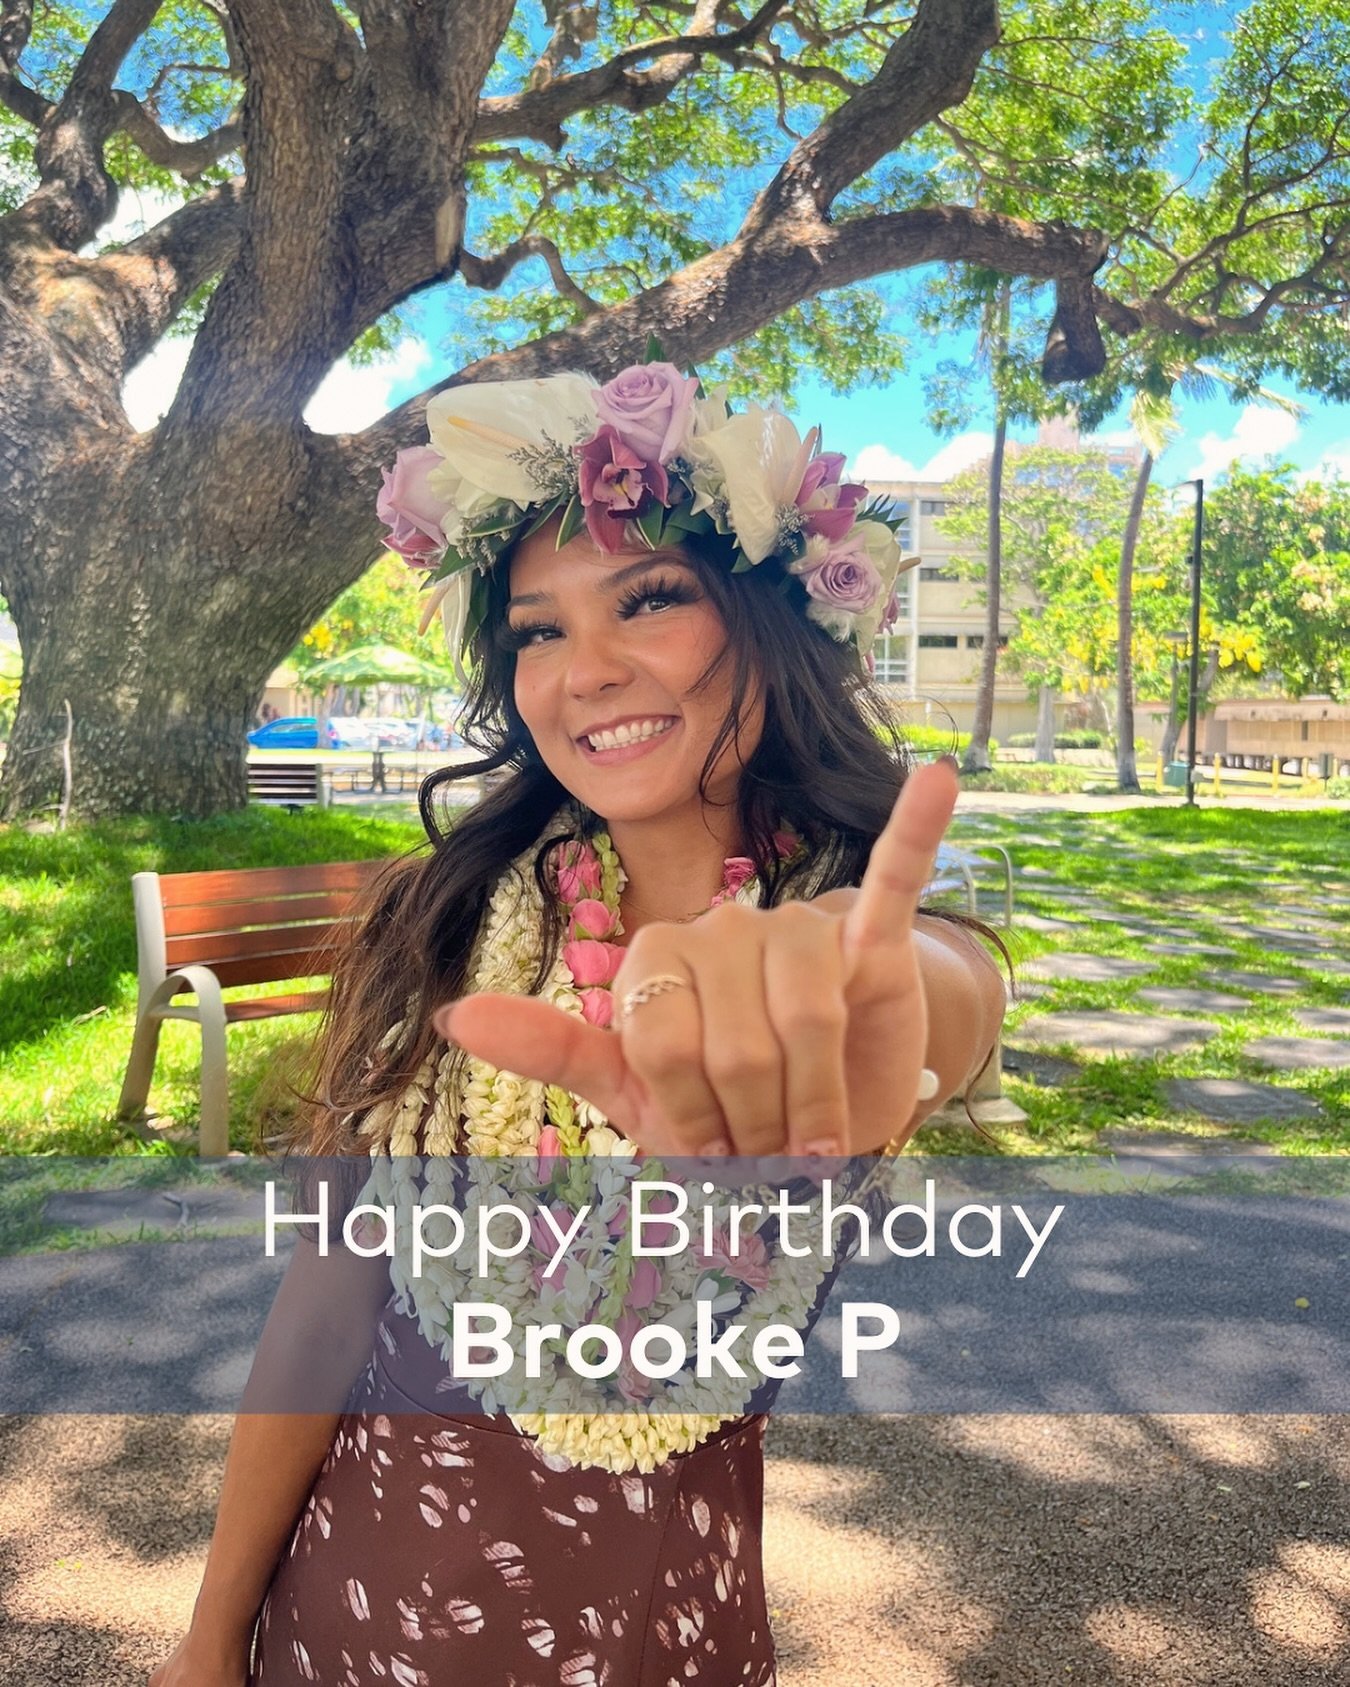 Happy birthday @brookieprotacio !!!

Brooke is so incredibly sweet and easy to get along with. She is selfless and generous and a genuinely kind person, but also very playful and silly!

Three fun facts about Brooke:
1. When she&rsquo;s not teaching 